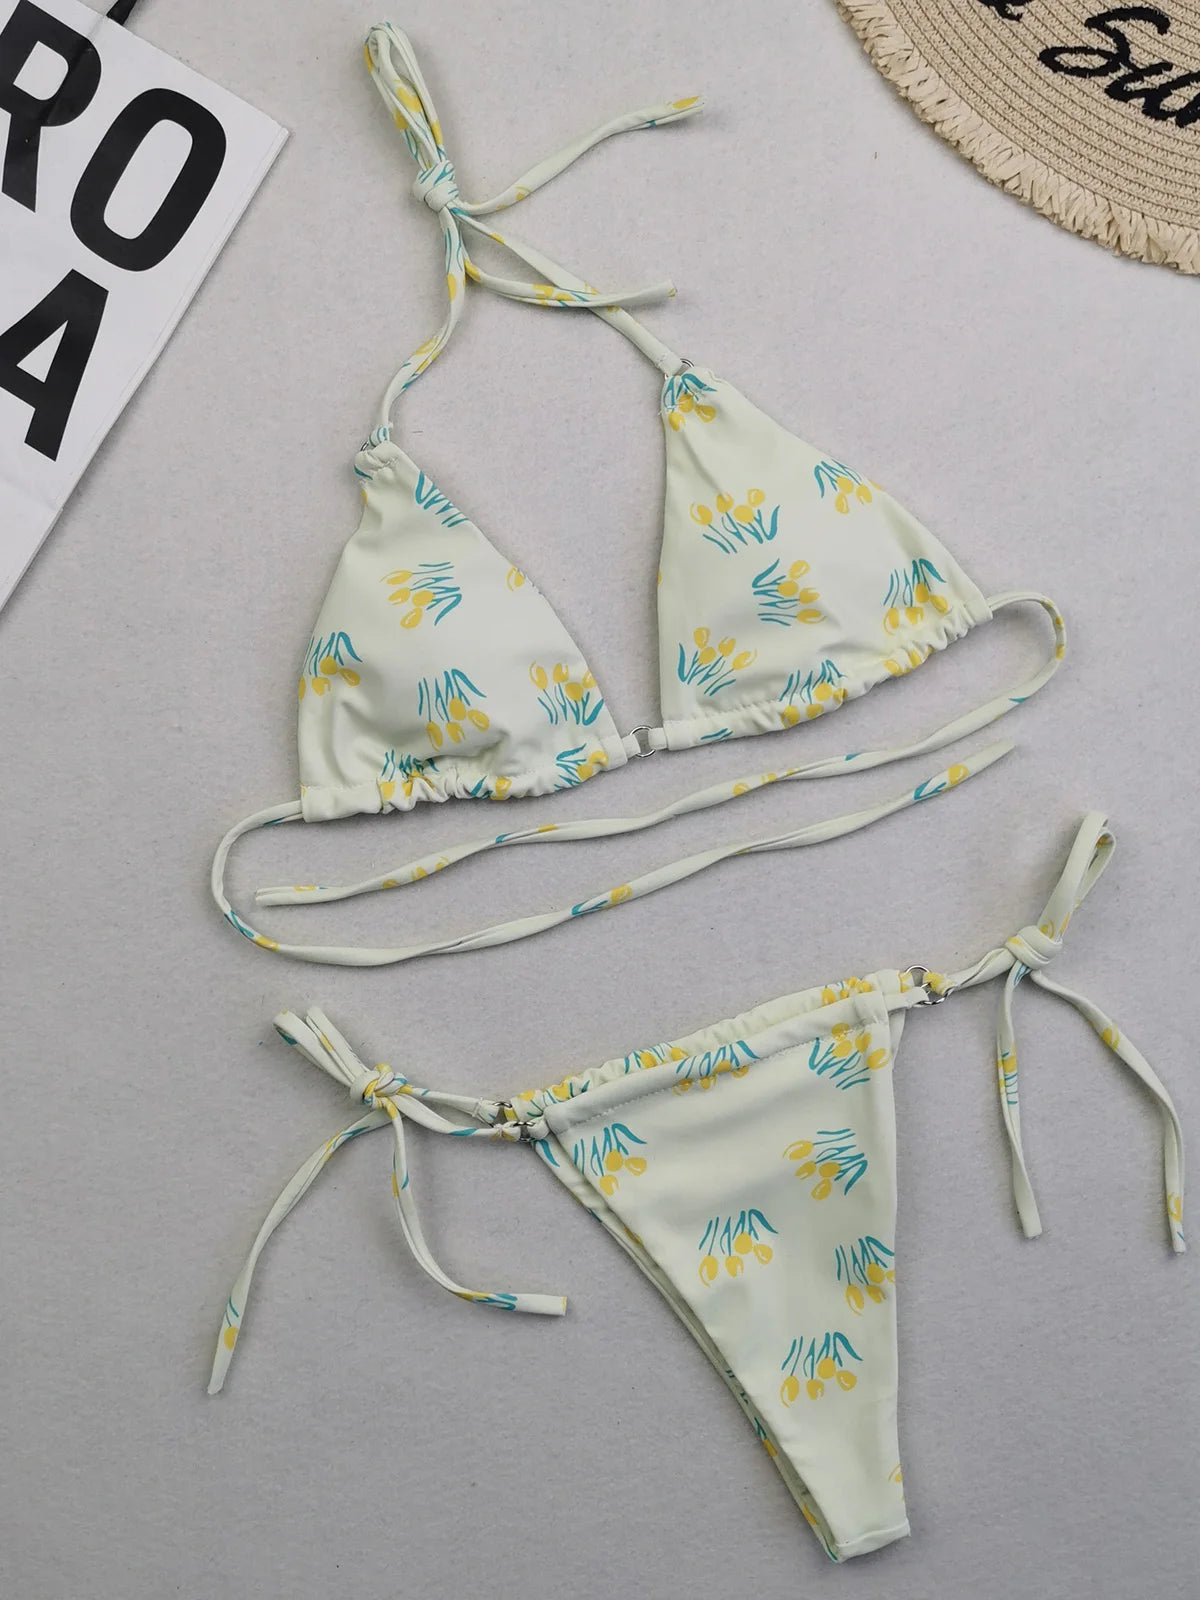 Two-Piece Polka Dot and Floral Bikini Set with a Halter Neck Design, Available in Sizes S through XL, Fashioned from Nylon and Spandex, Suitable for Women, Wire Free with Low Waist Design, Comes with Pad, Fits True to Size. Comes in Multiple Colors such as Yellow, Multicolor, Wheat, Pink, Watermelon Red, Red, Black, Blue, Coffee, Green, Orange, Purple, and in Different Patterns like Flowers, Dots, Plaid, Diamond, and Printed Design.